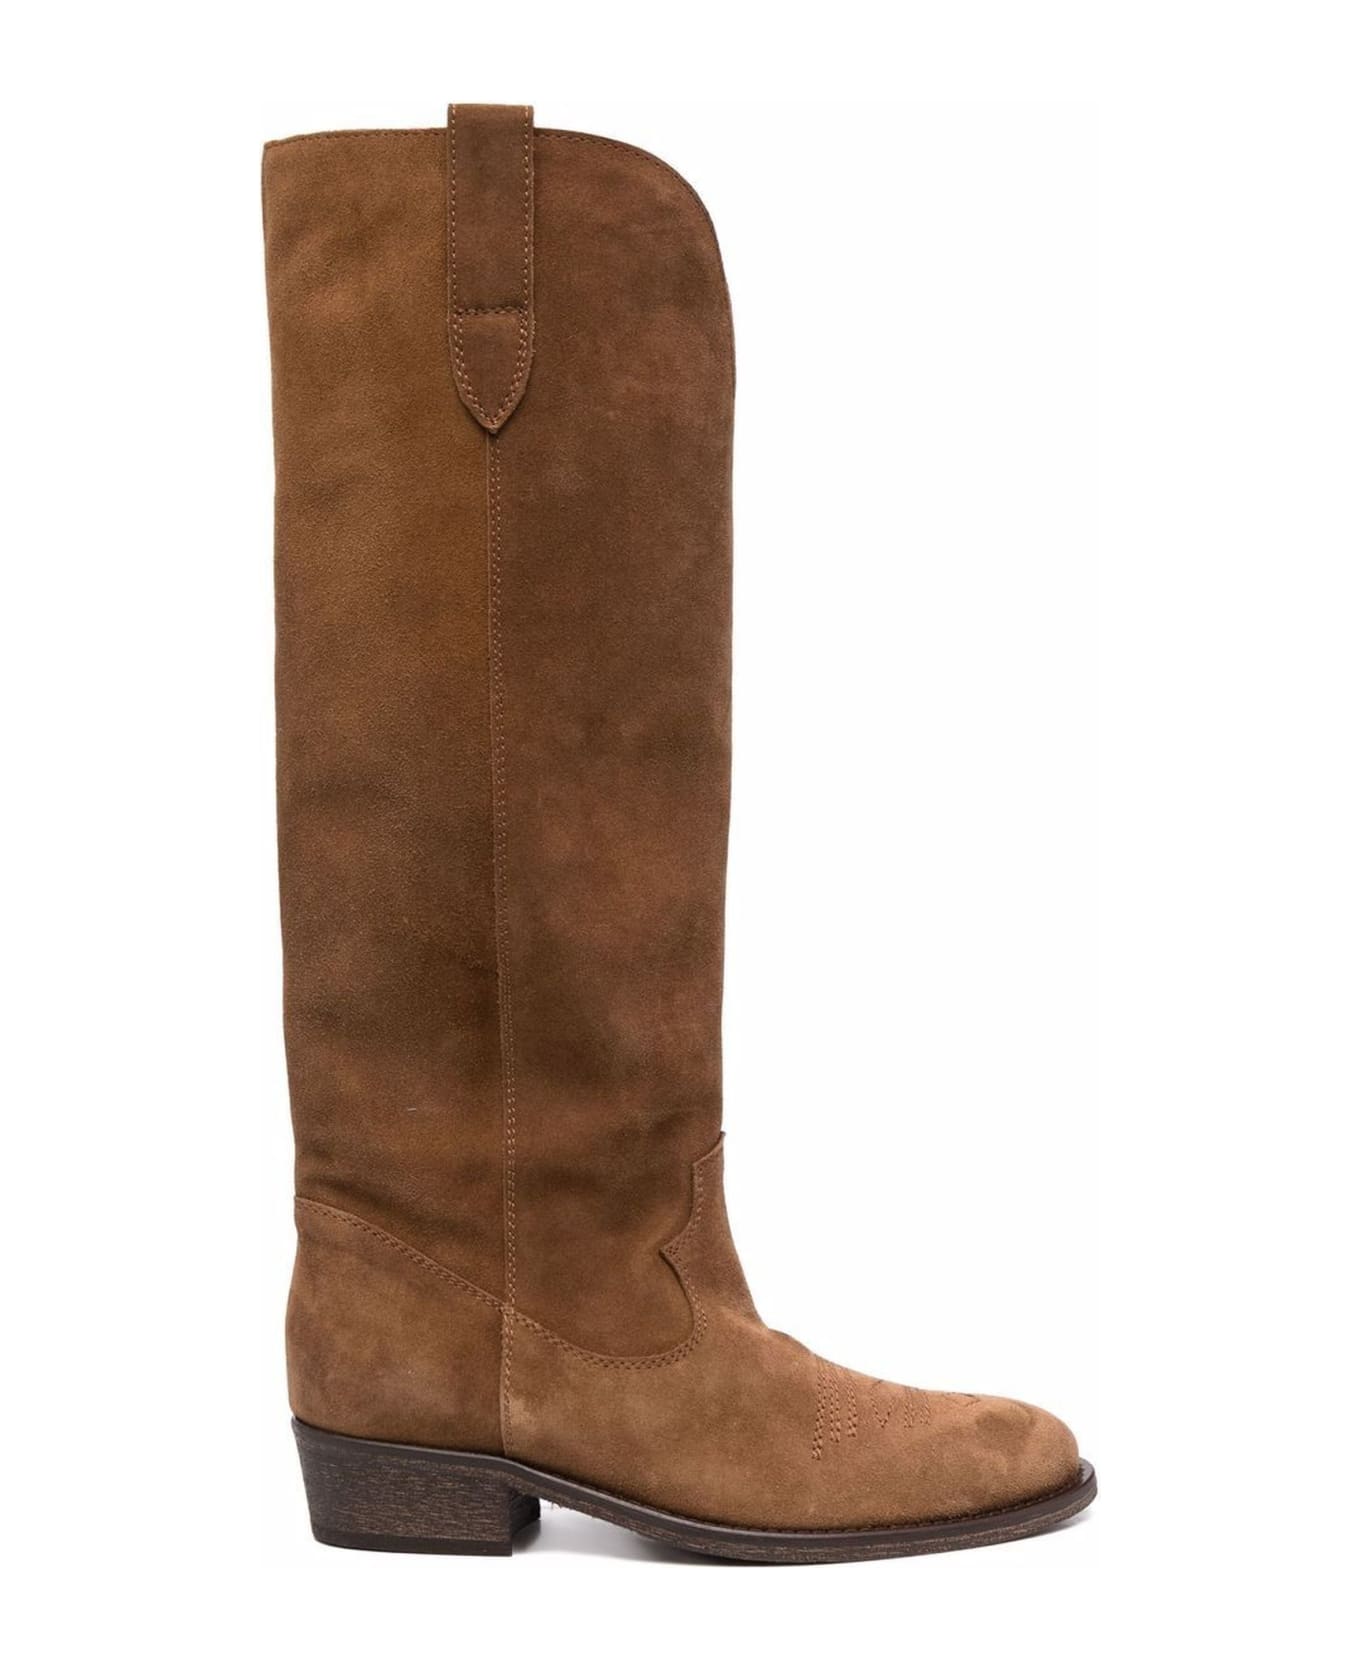 Via Roma 15 Brown Suede Boots - Brown